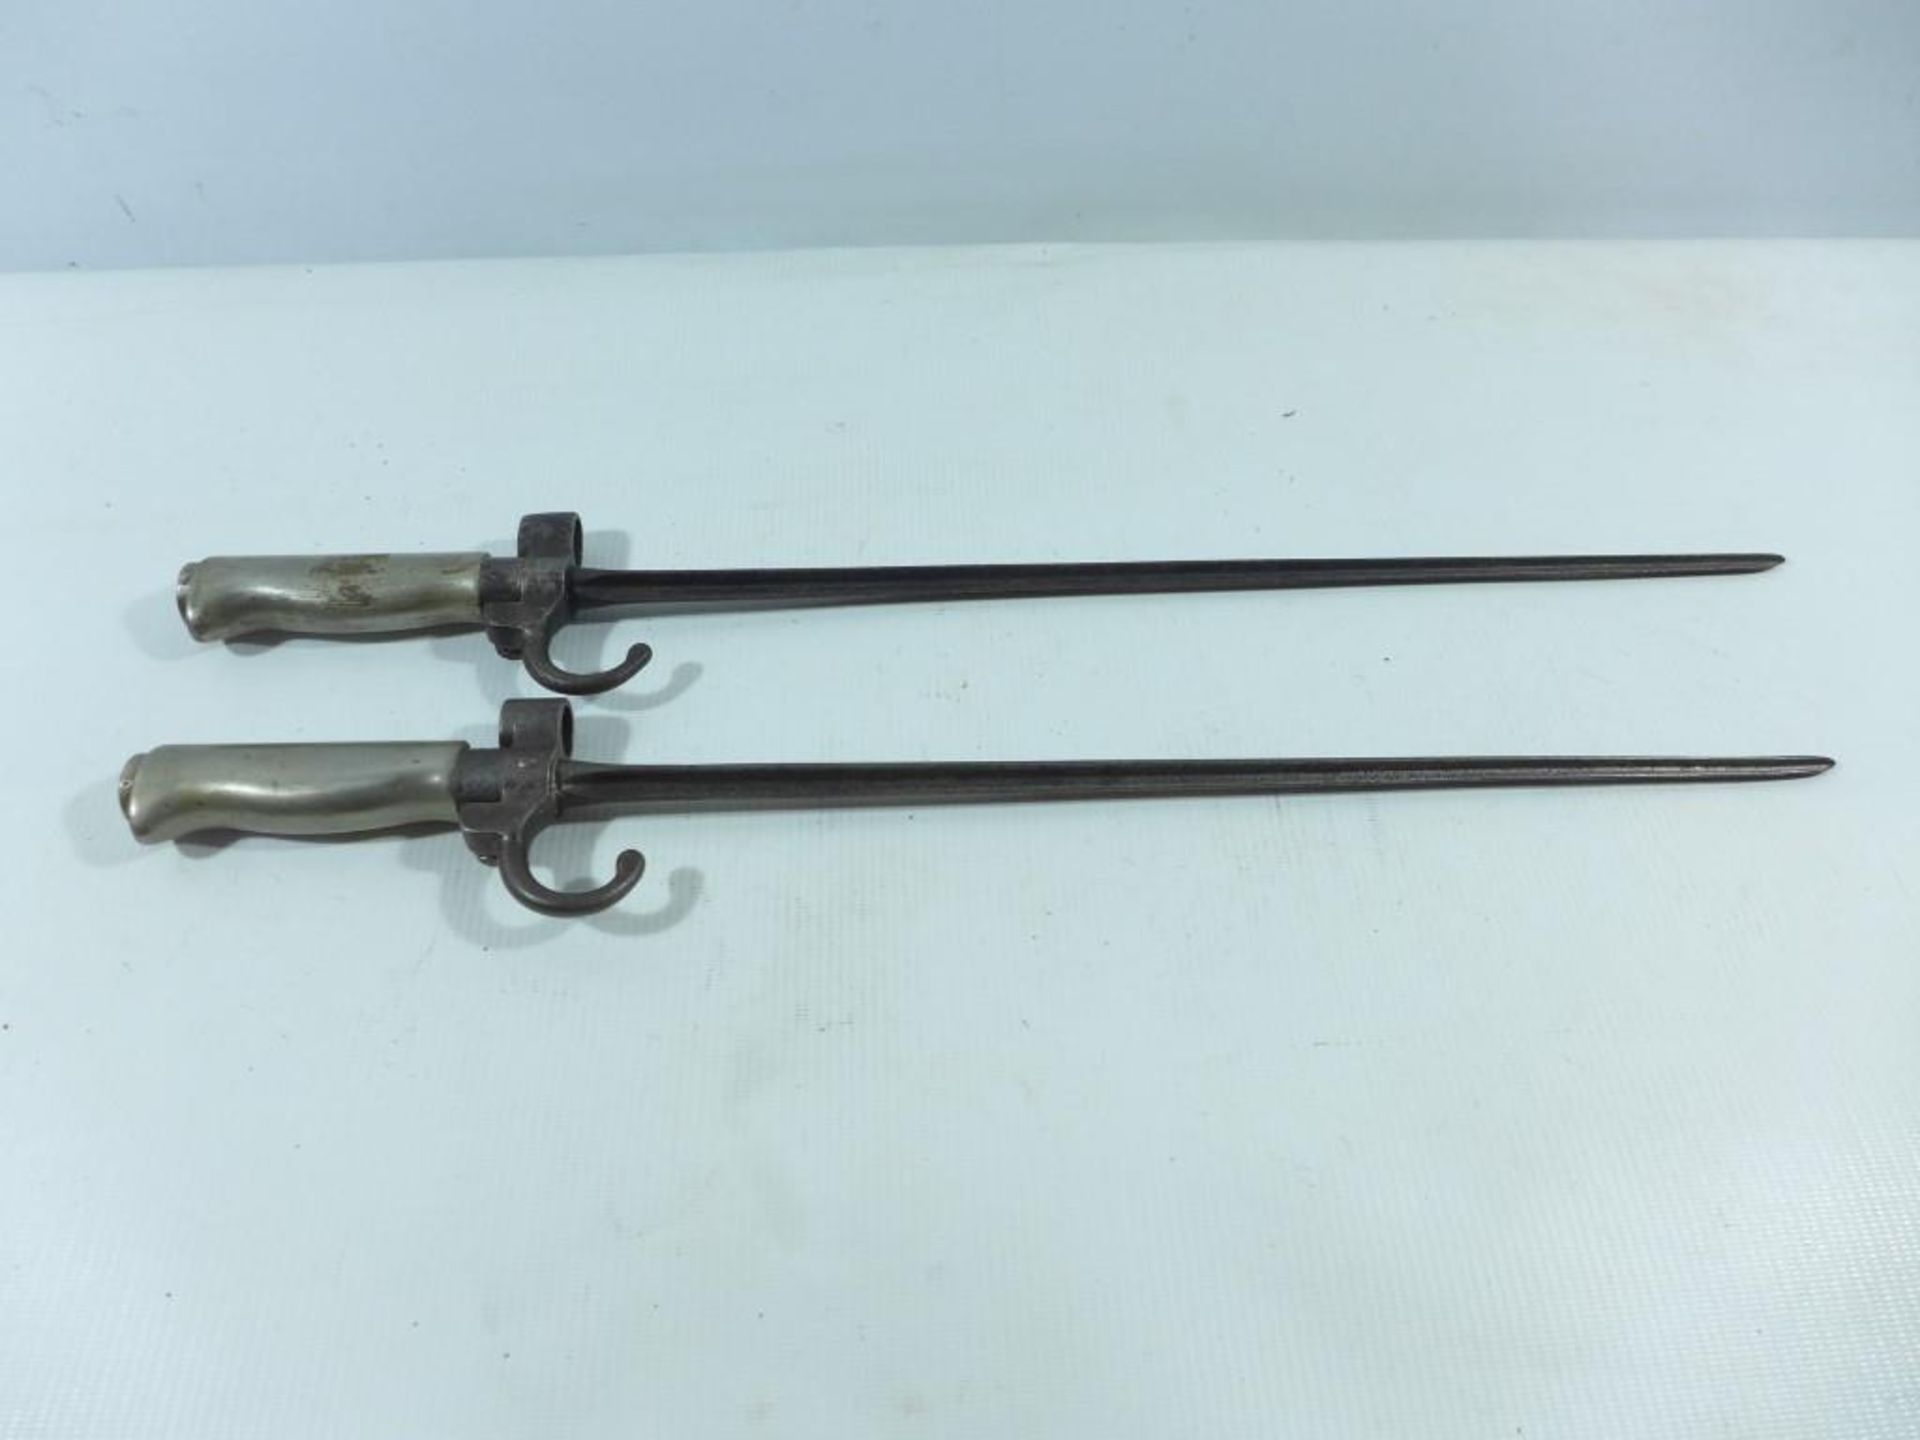 TWO FRENCH 1886 PATTERN LEBEL BAYONETS, LENGTH OF BLADES 37.5CM AND 40CM - Image 2 of 4